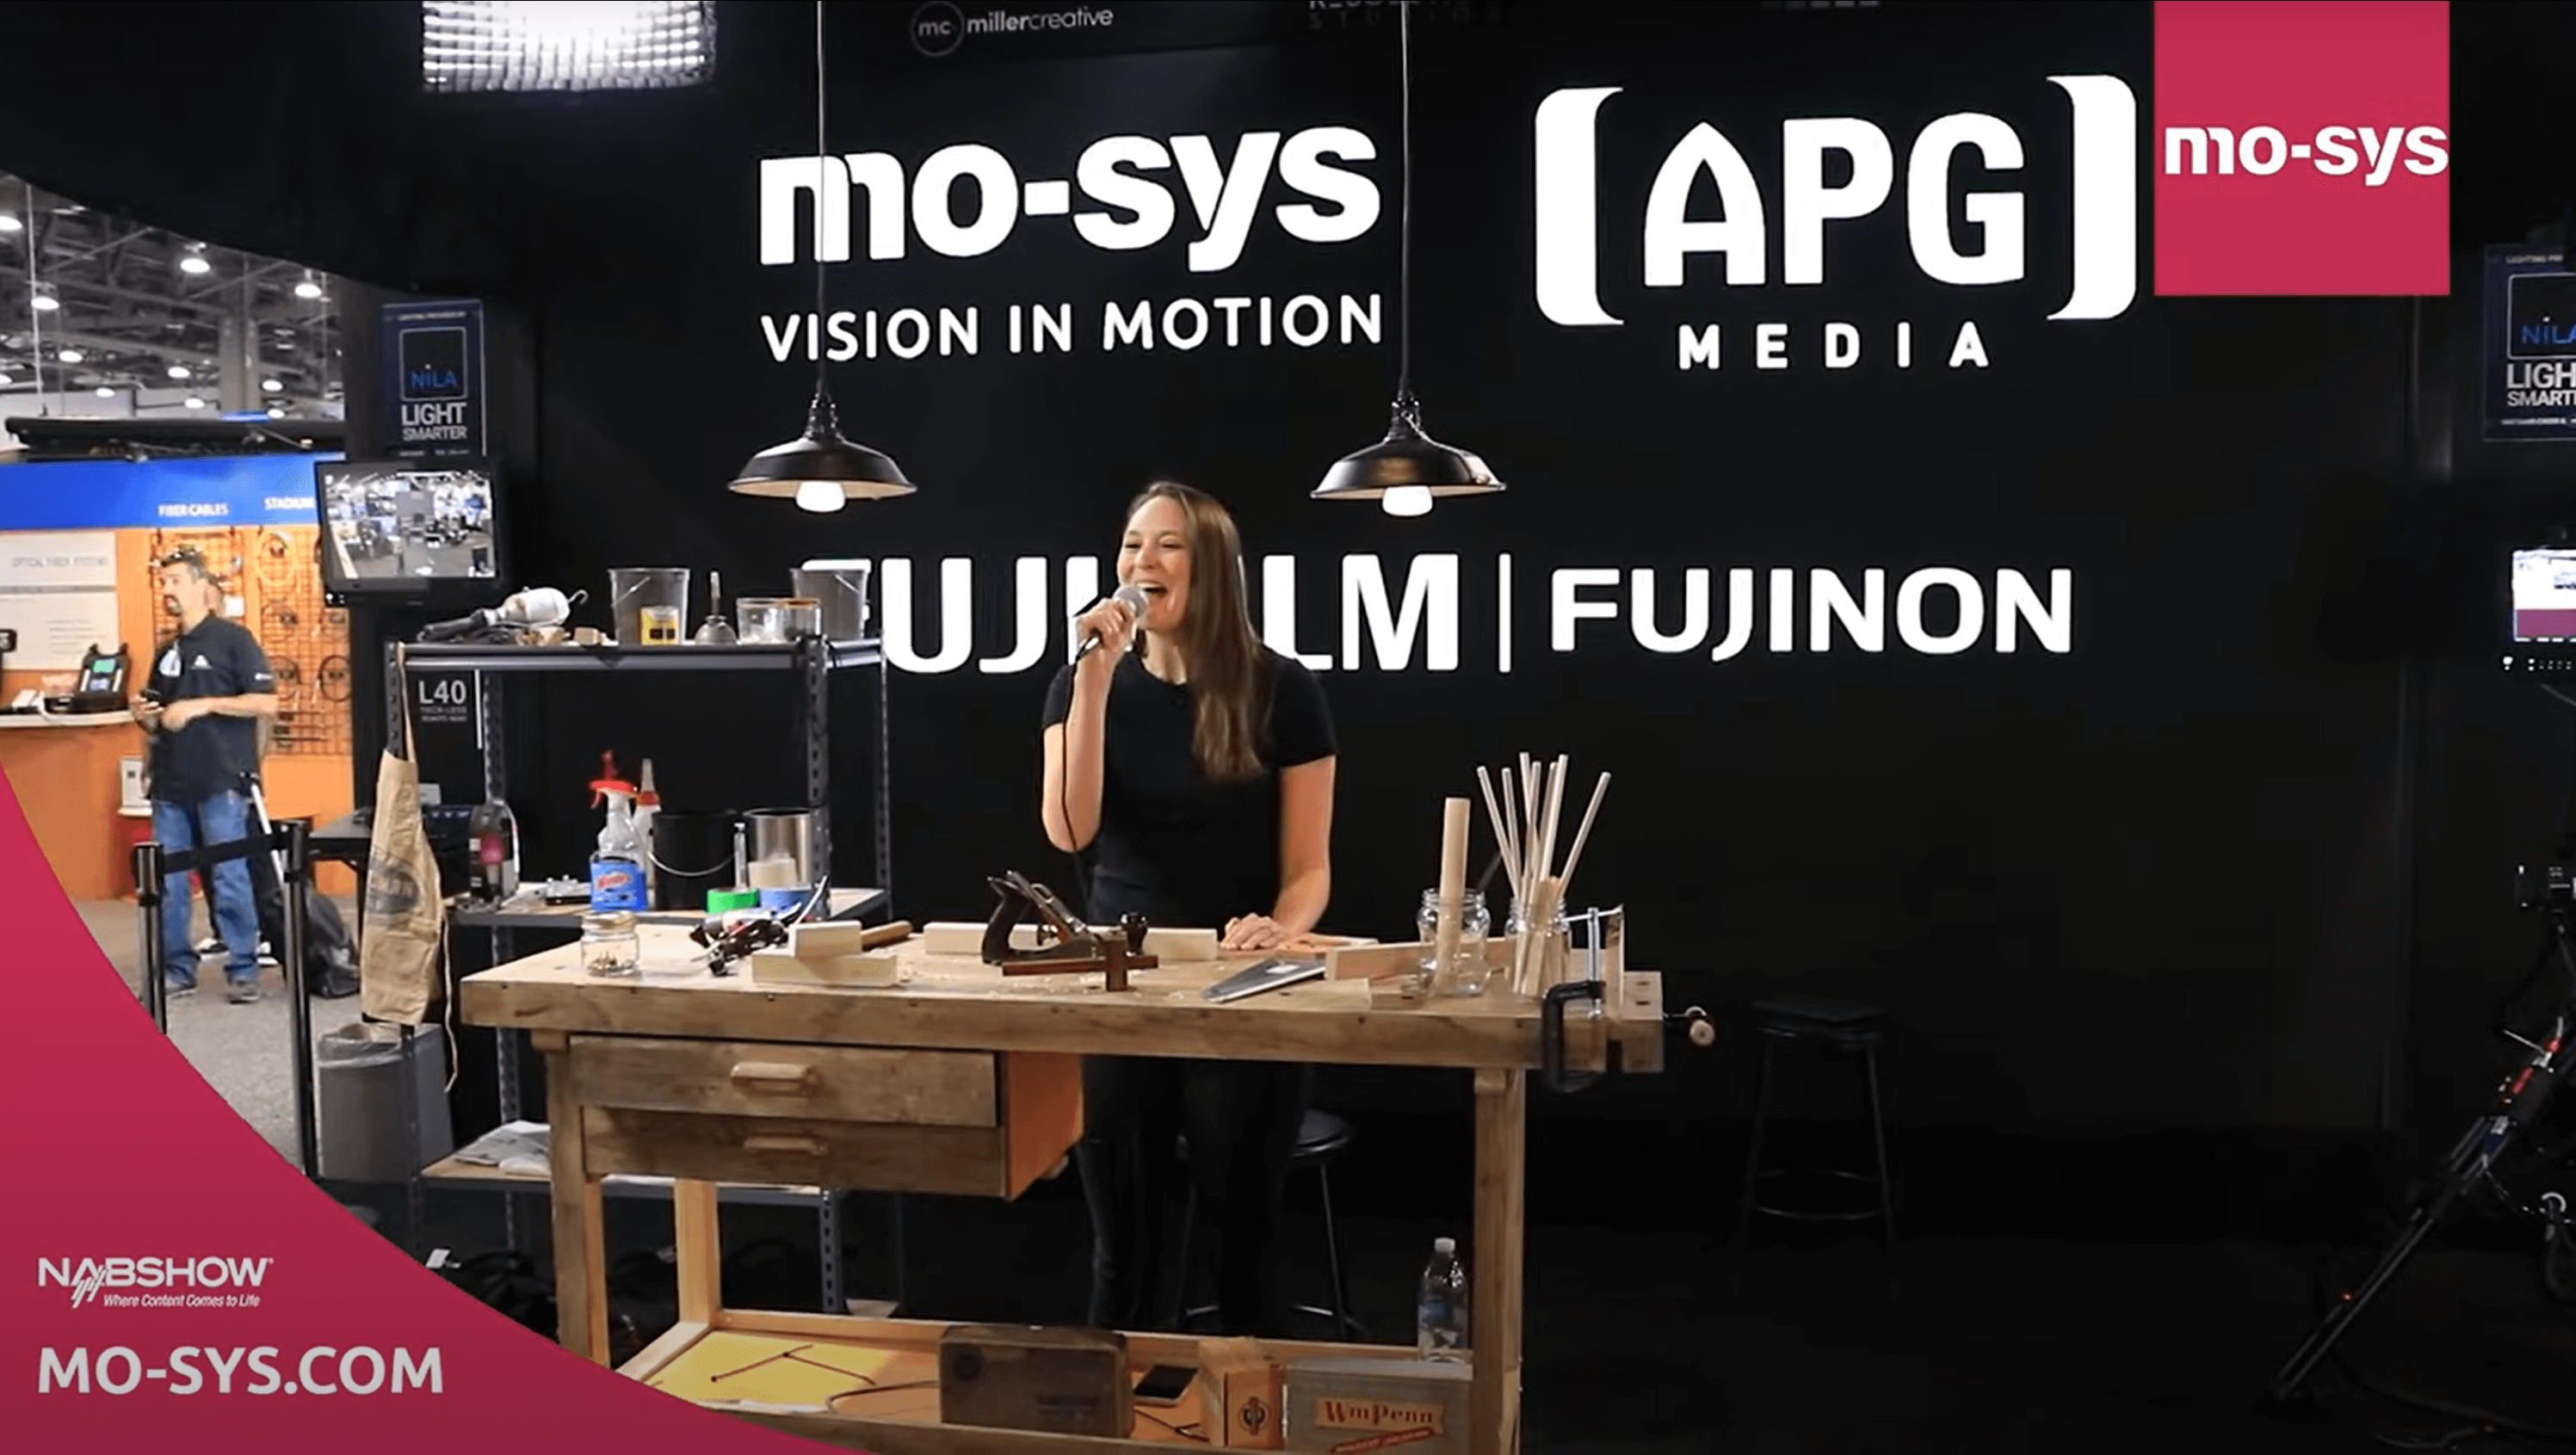 Mo-Sys demonstrates LED Virtual Production with Fujifilm and APG Media - NAB 2022